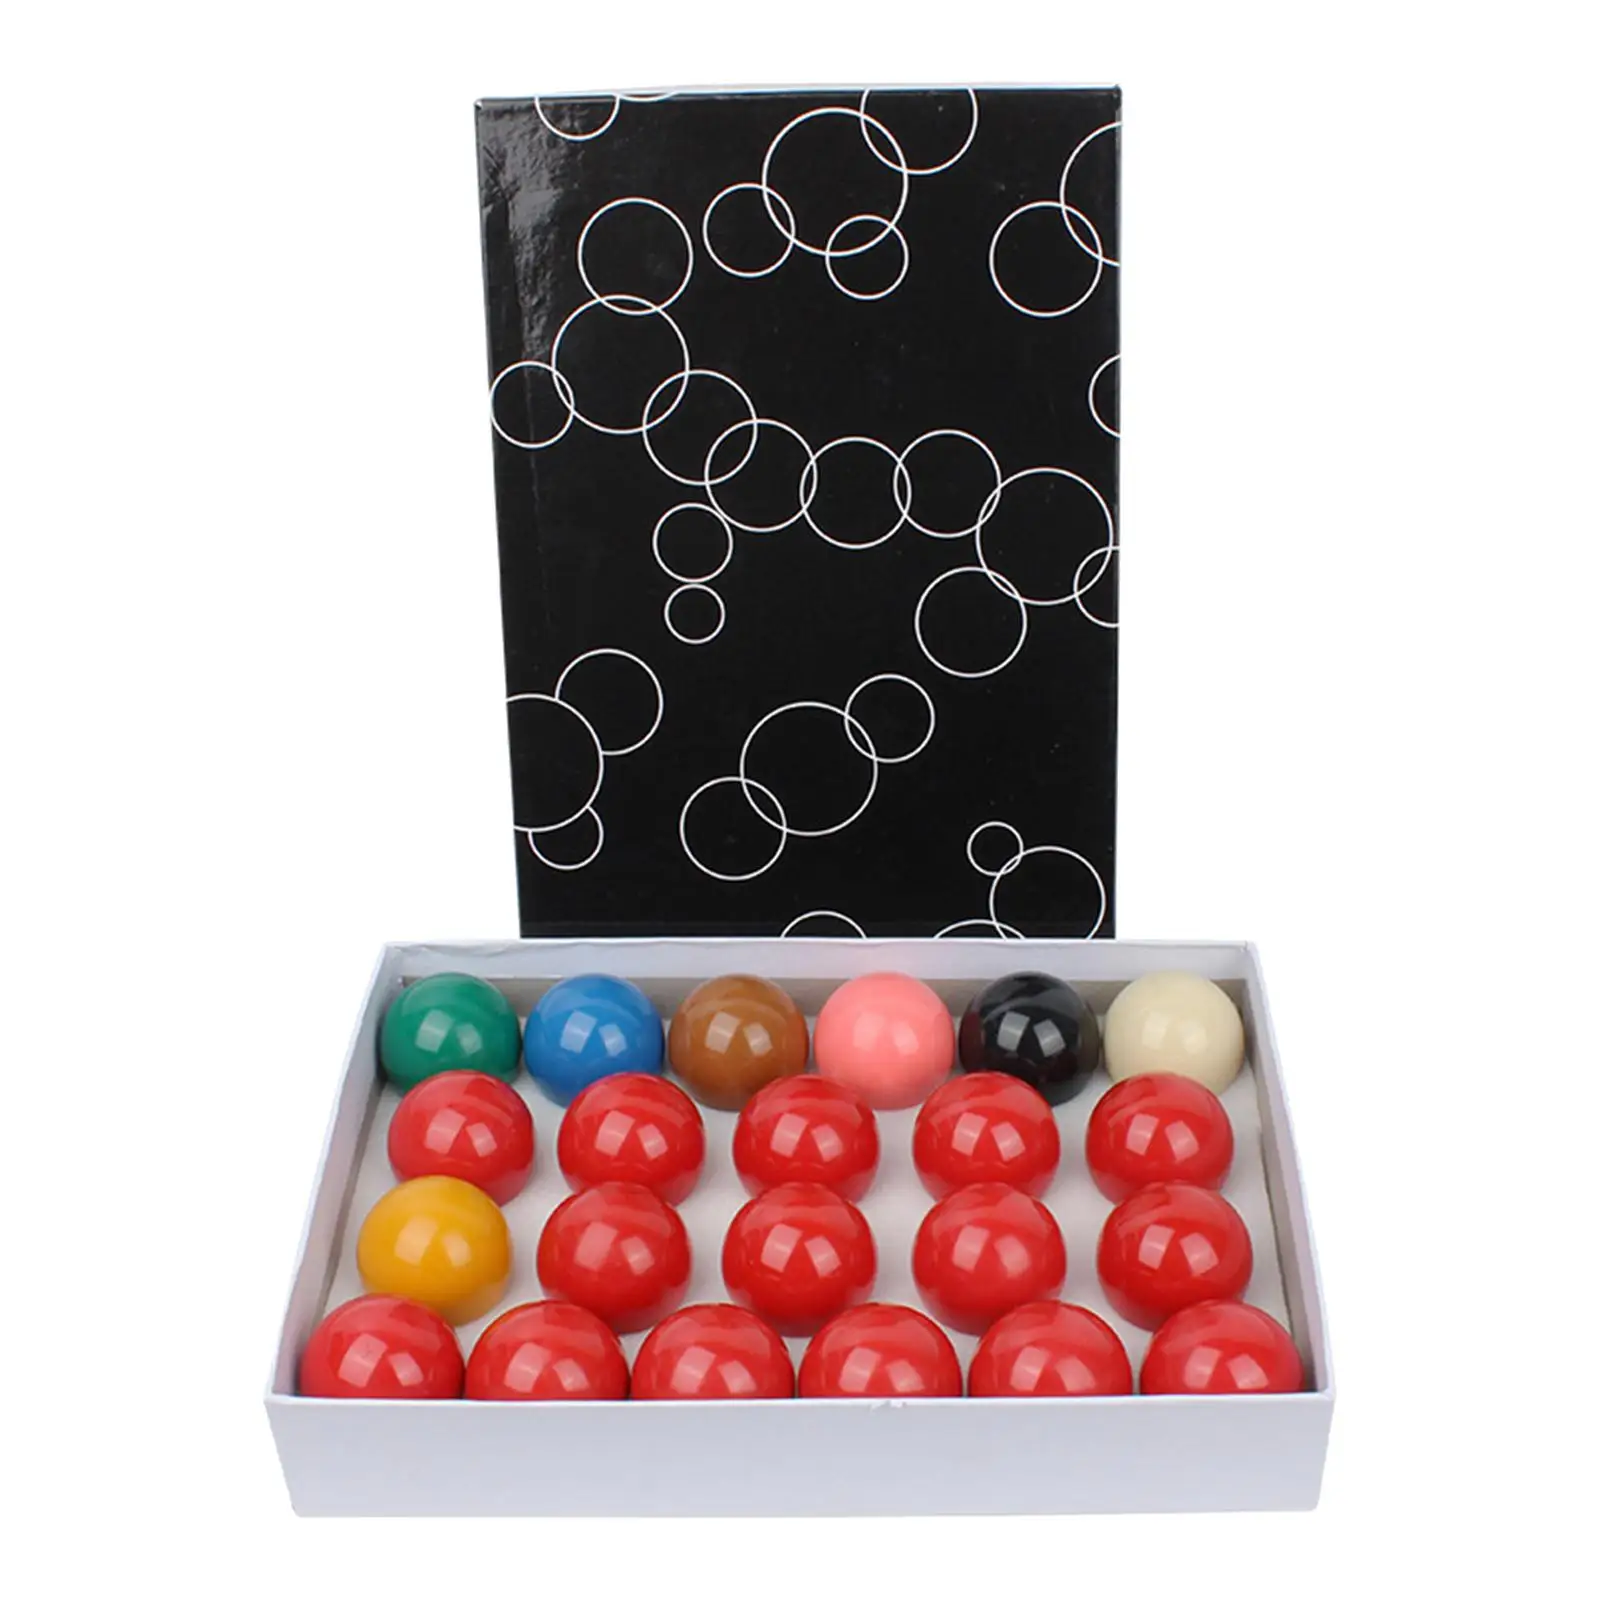 22x Billiard Balls Set, Pool Table Balls Professional 50.8mm Resin Colorful Practice Ball Snooker Ball Set for Gaming Rooms